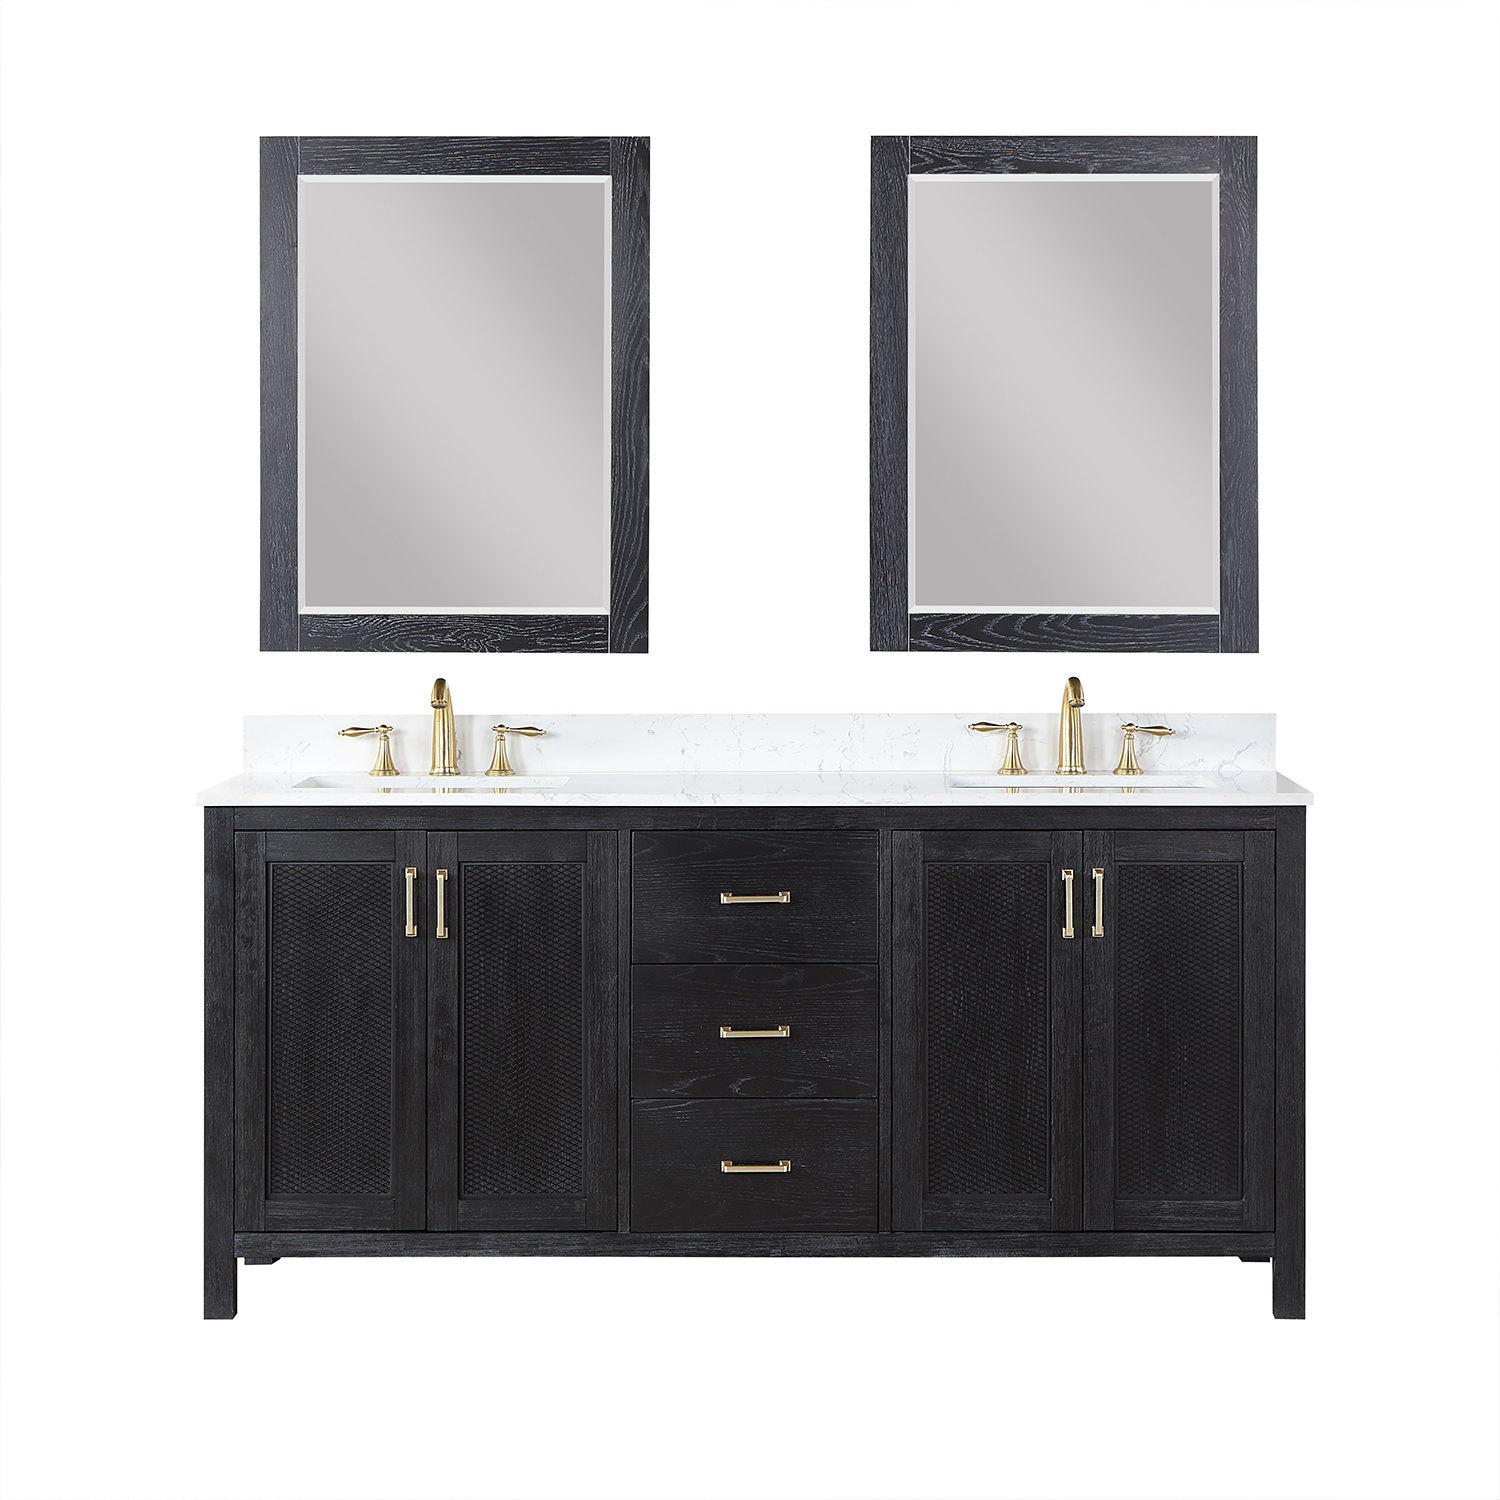 Issac Edwards Collection 72" Double Bathroom Vanity Set in Black Oak with Carrara White Composite Stone Countertop with Mirror 